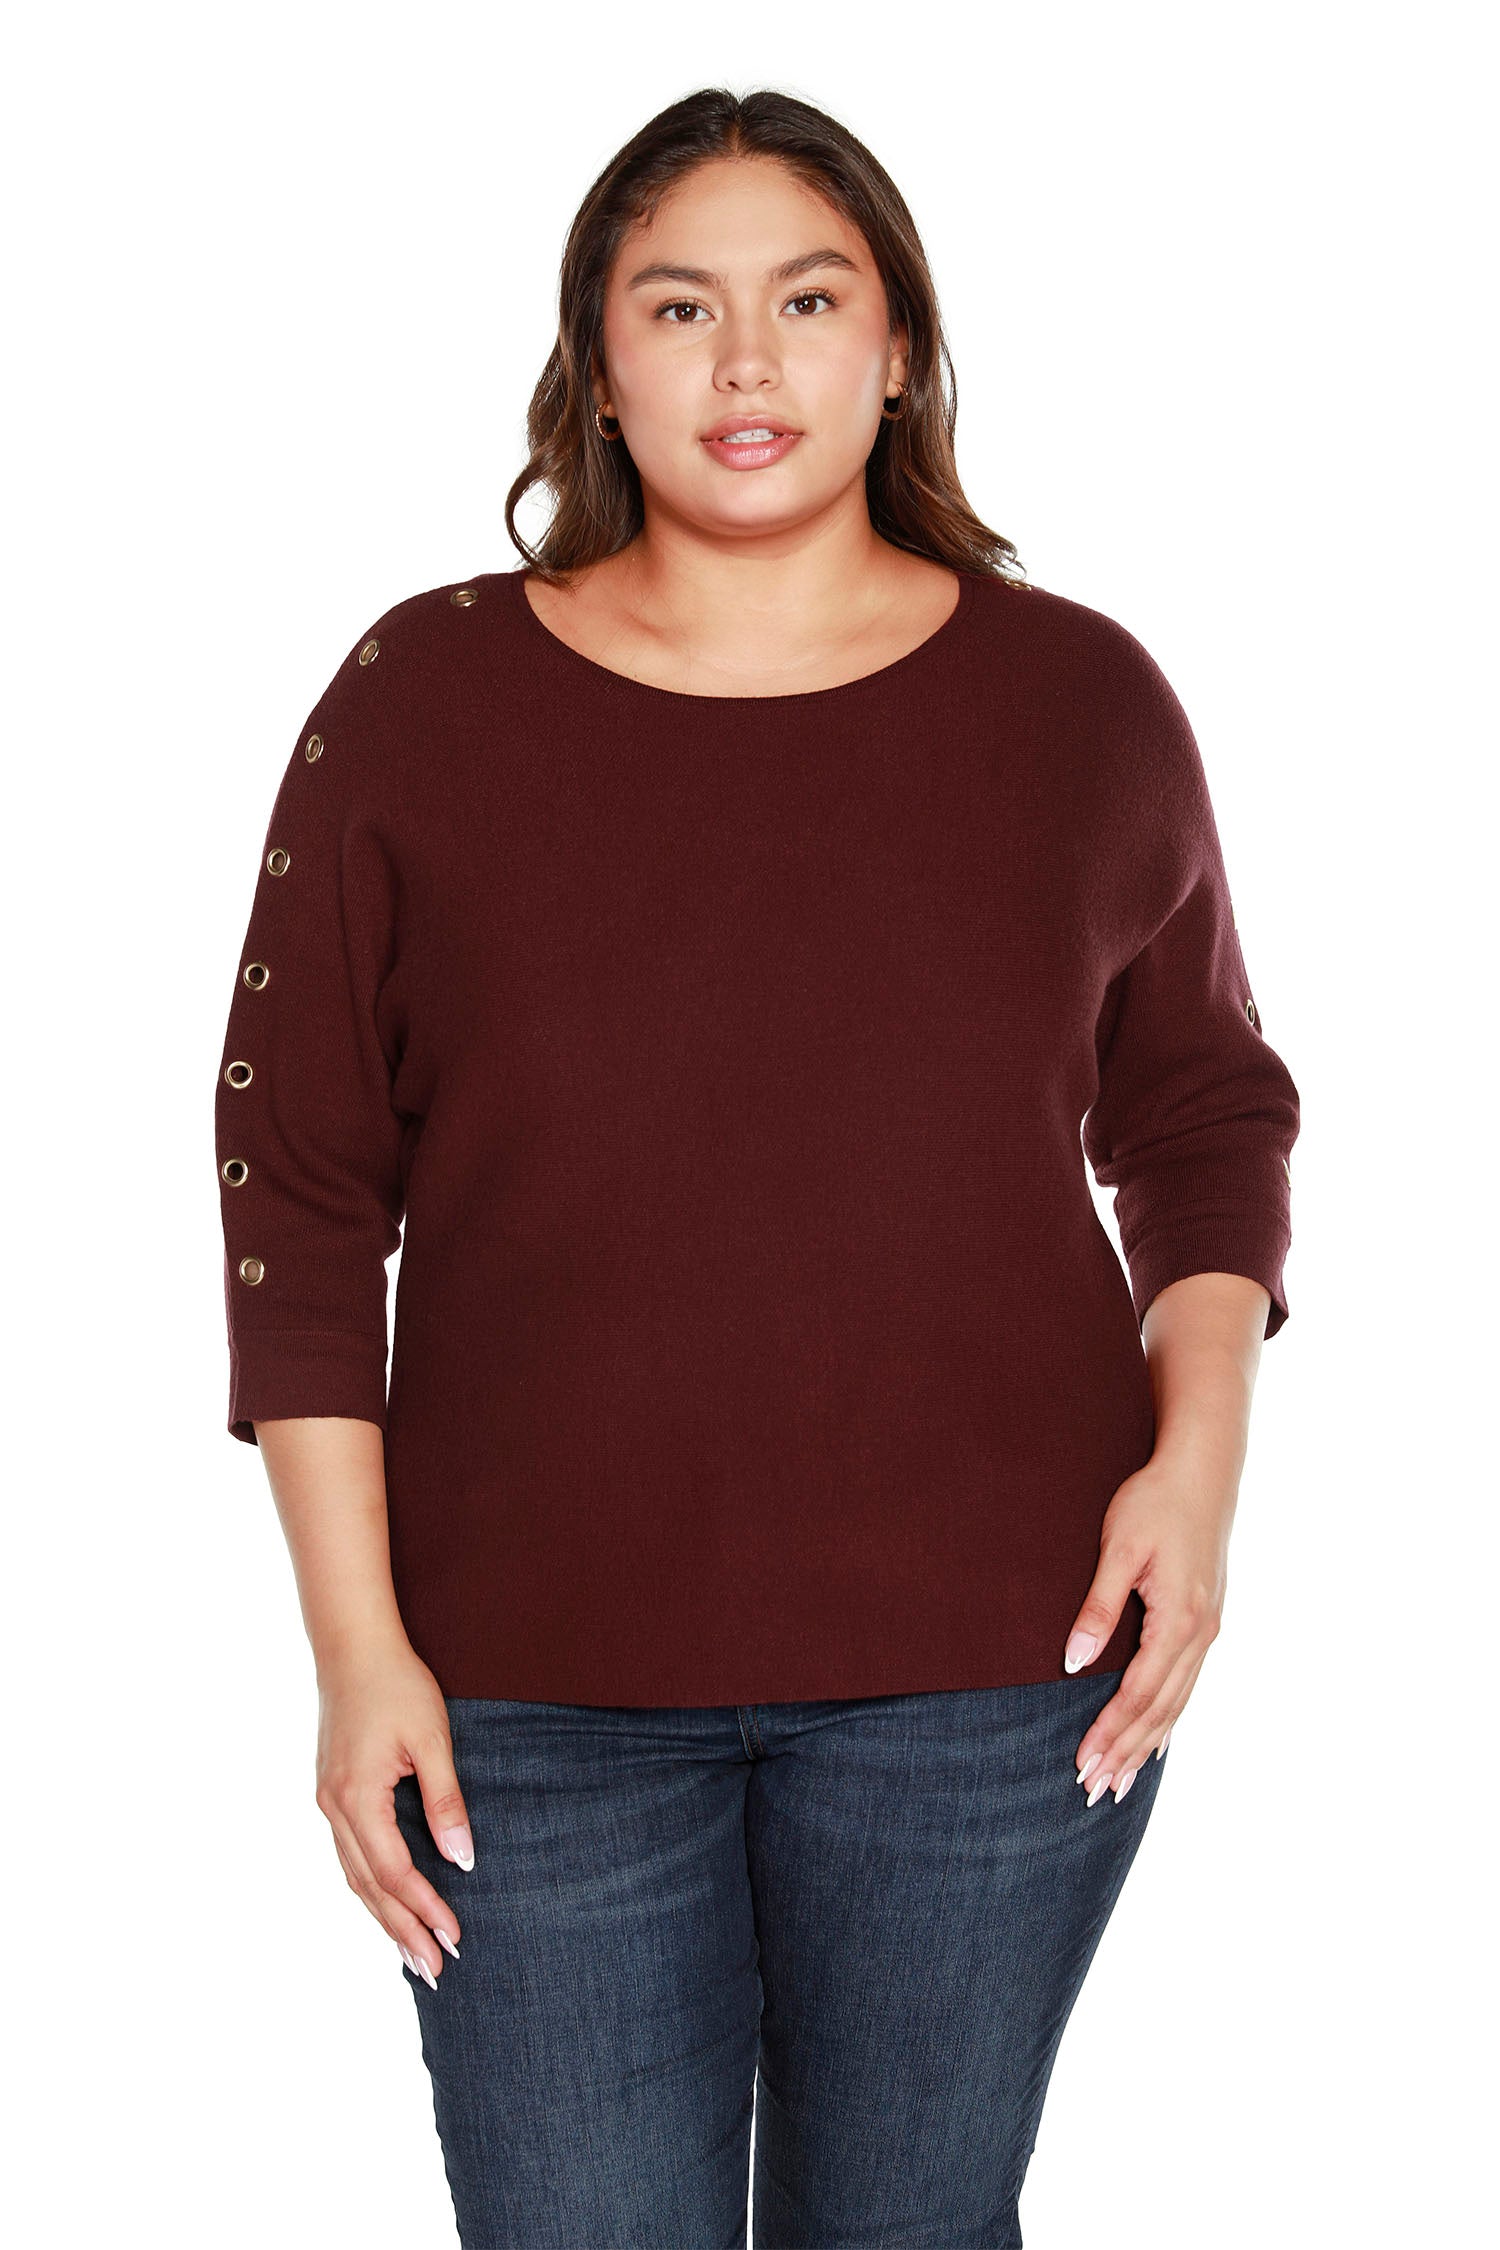 Crafted in a super soft knit fabric, this contemporary plus size dolman sweater is the perfect choice for any modern woman's wardrobe. Featuring a loose and comfortable fit with 3/4 sleeves and grommet trim, this sweater adds a modern touch to any look. 